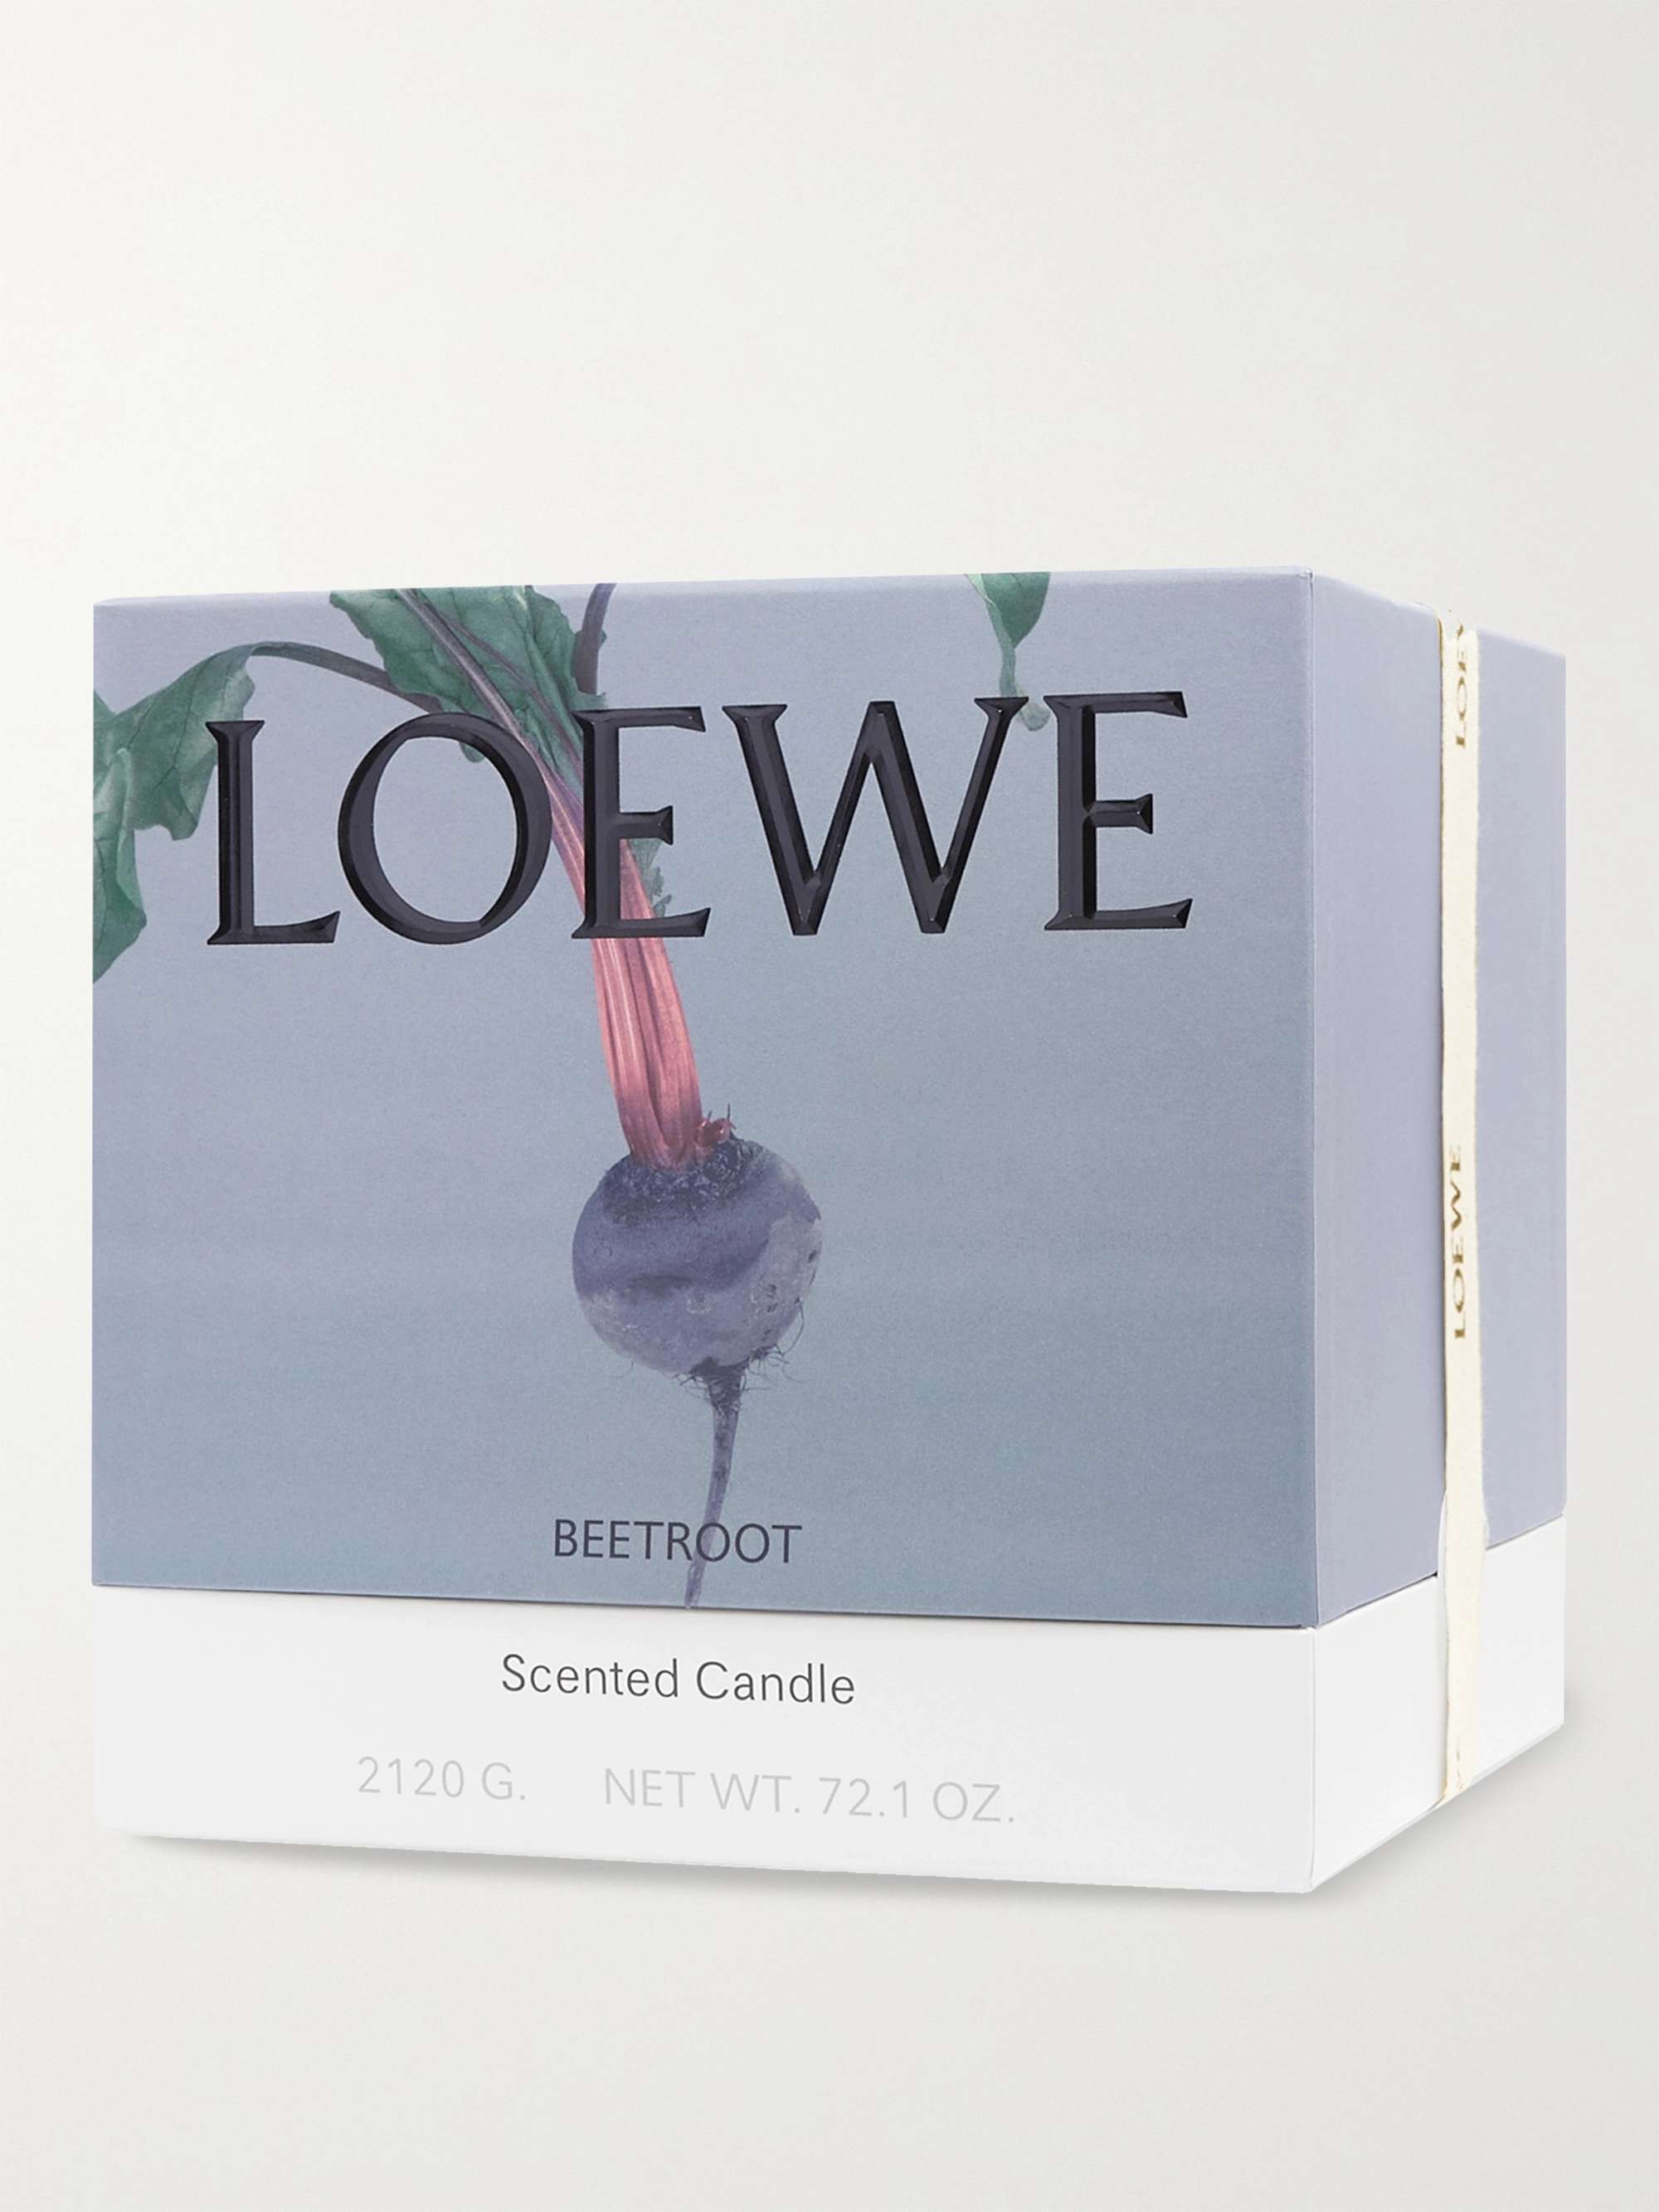 LOEWE HOME SCENTS Beetroot Scented Candle, 170g